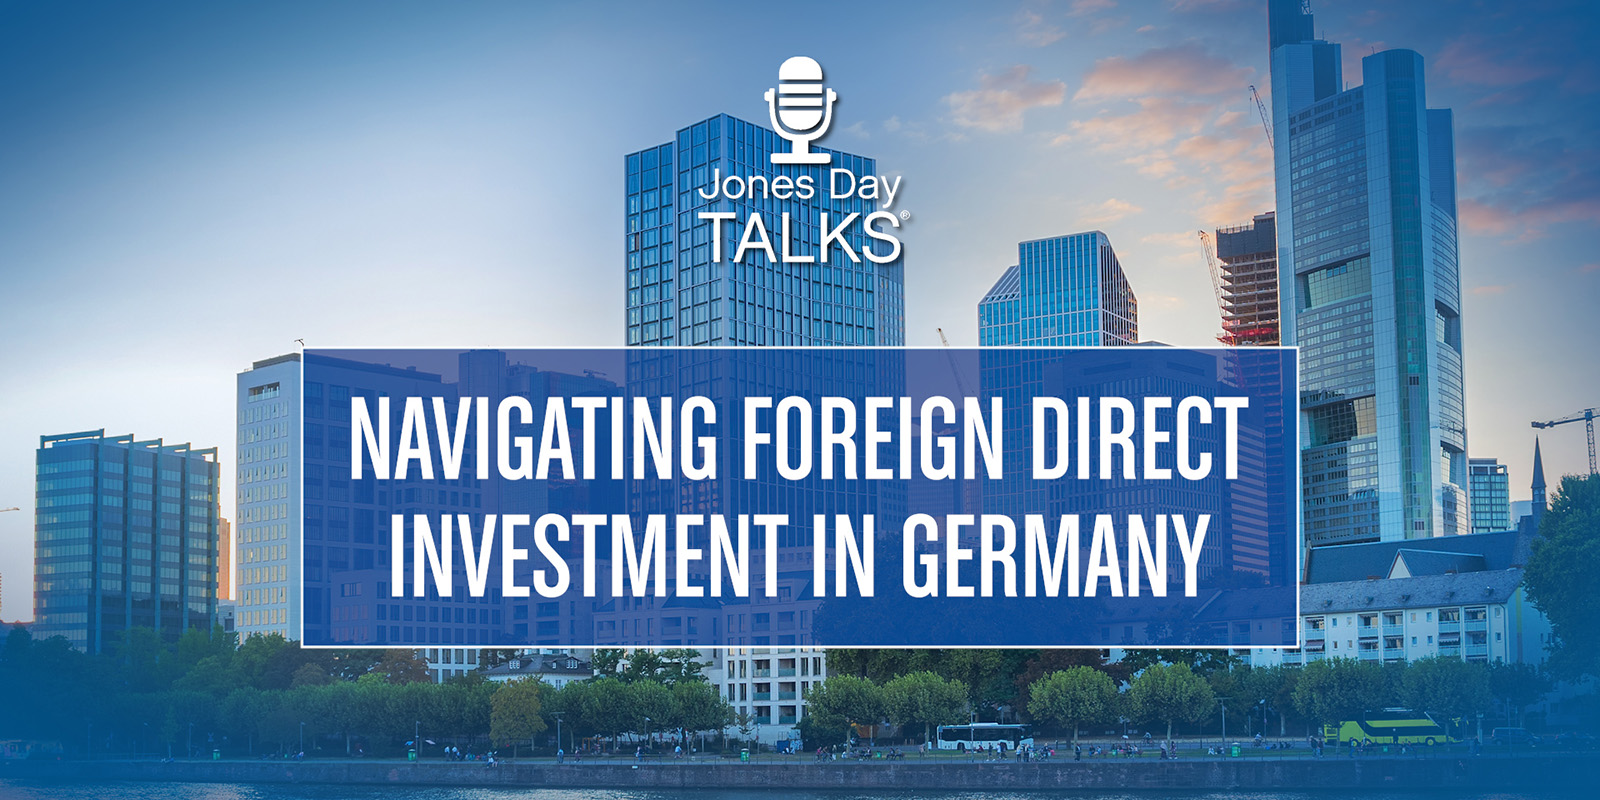 Jones Day Talks Navigating Foreign Direct Investment in